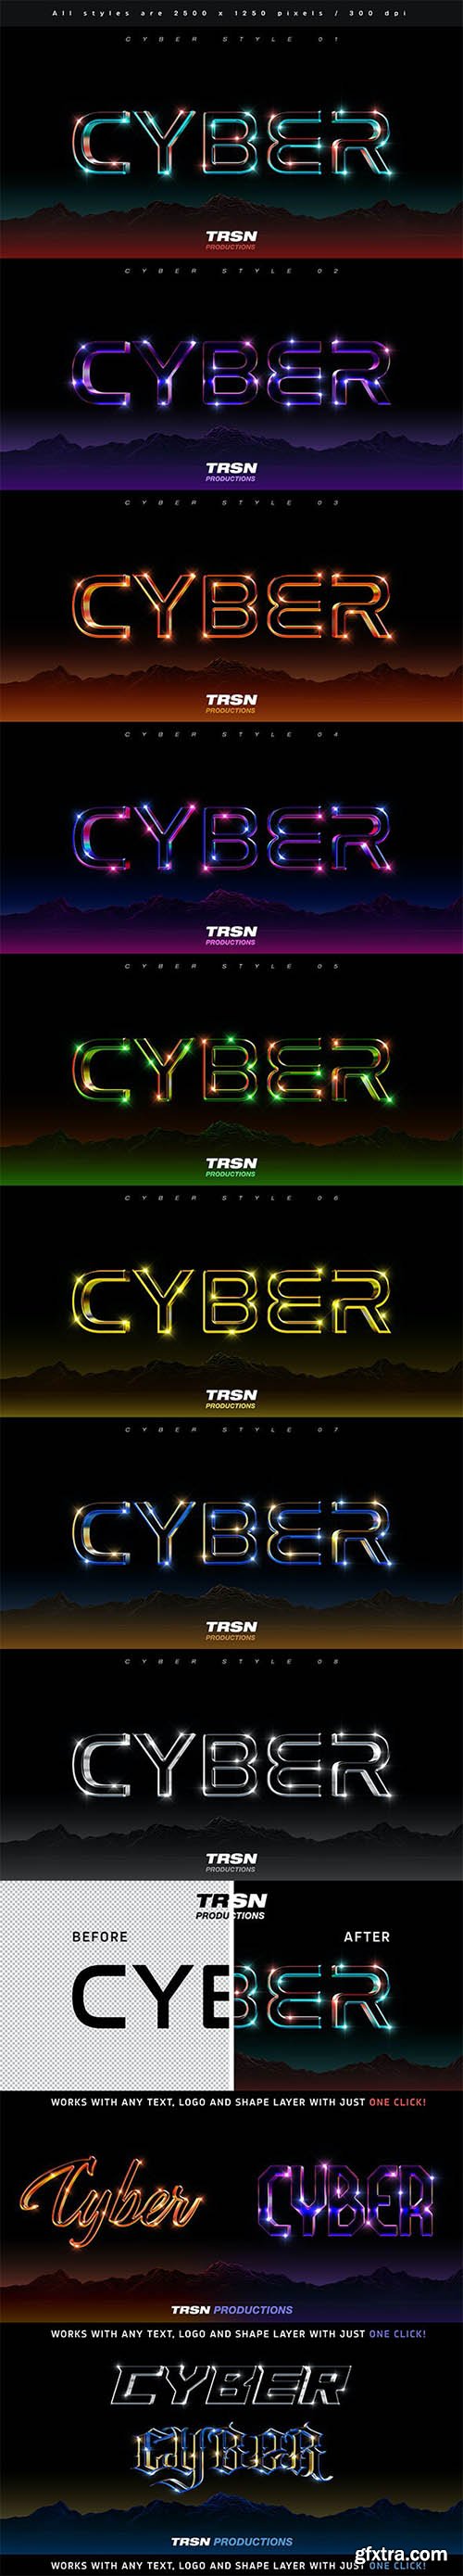 GraphicRiver - Cyber 3D Text Effect Vol 1 30015725